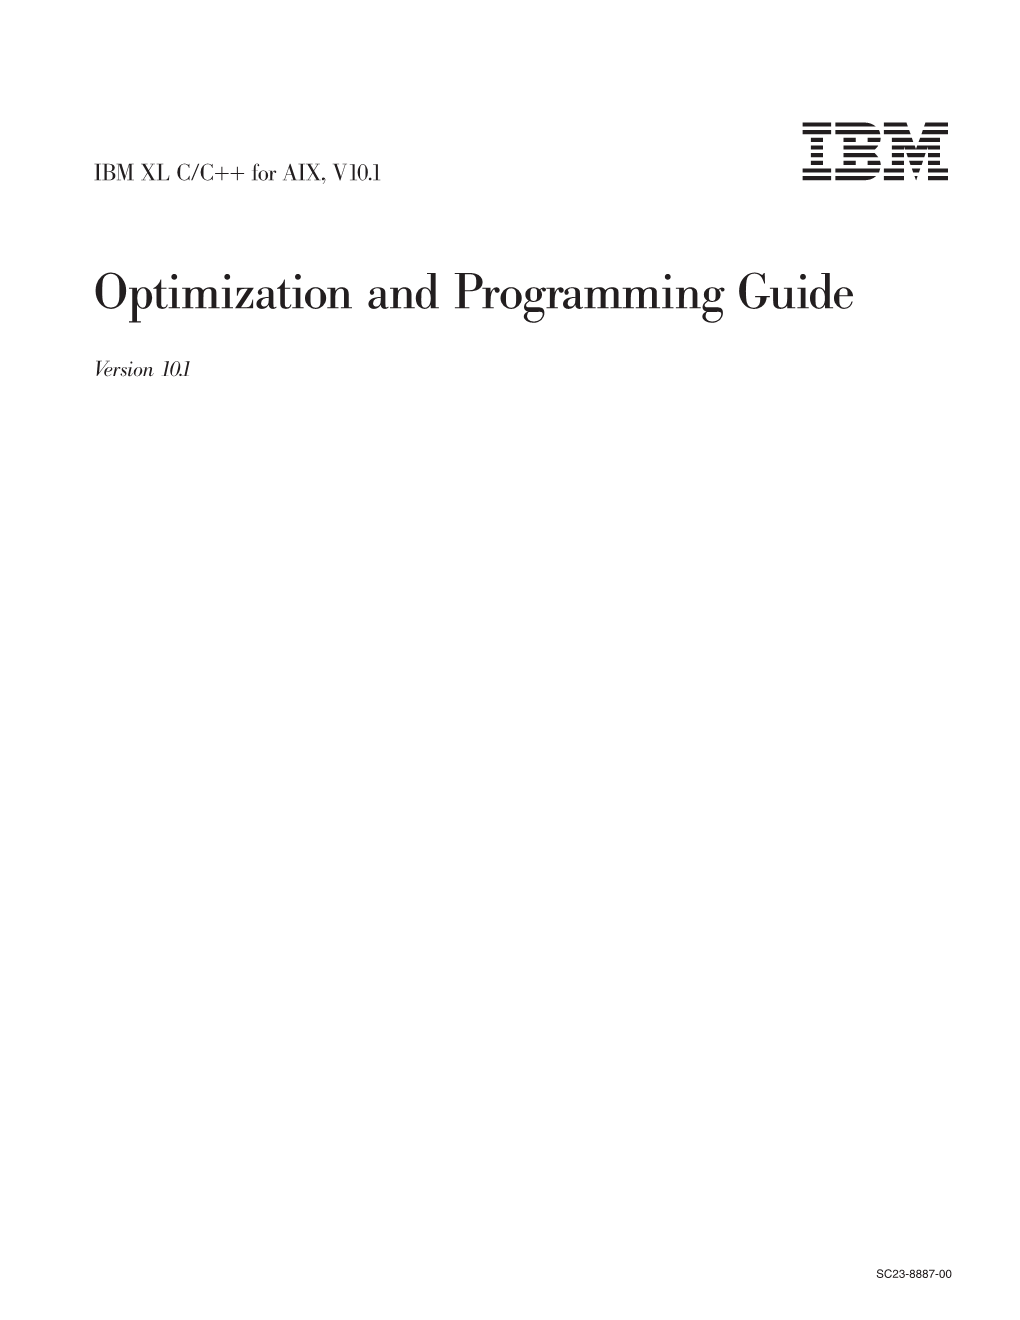 XL C/C++: Optimization and Programming Guide